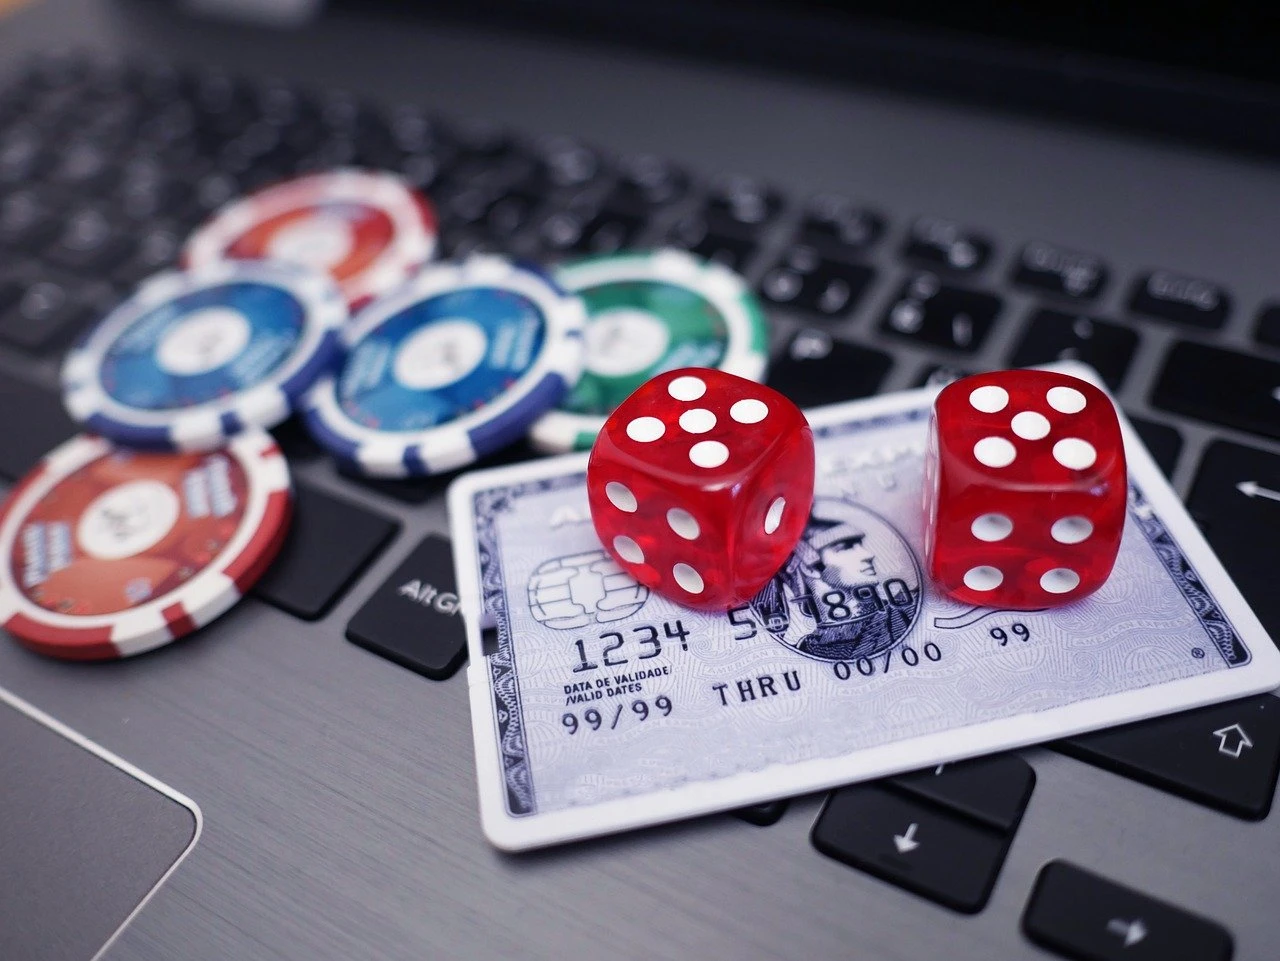 Never Suffer From best casino sites Again